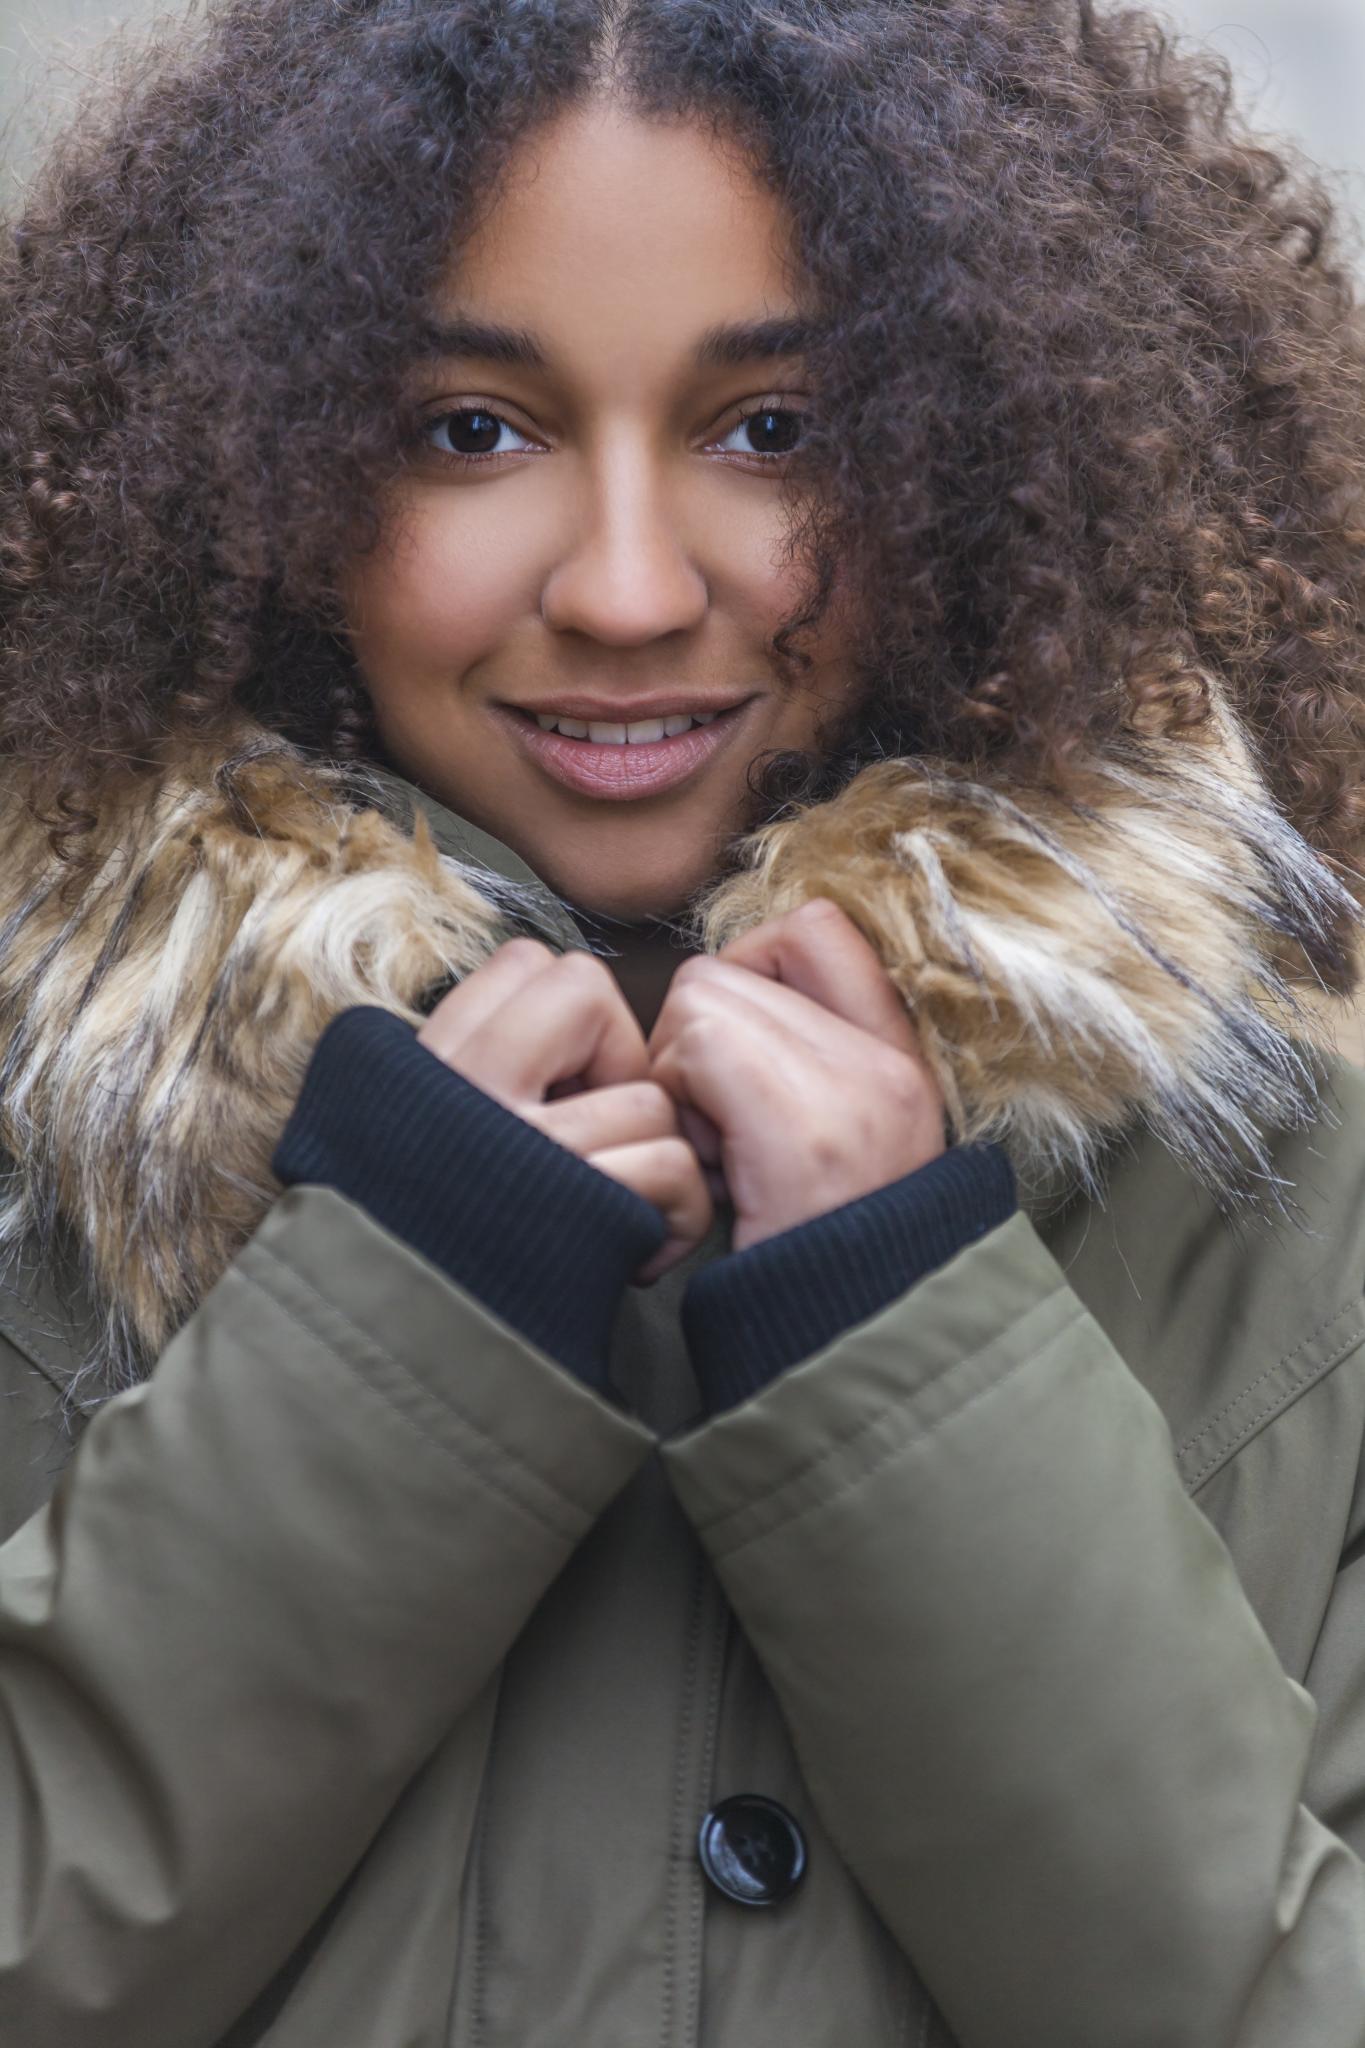 Winter is Here! Protect Your Transitioning Hair From The Changing Seasons